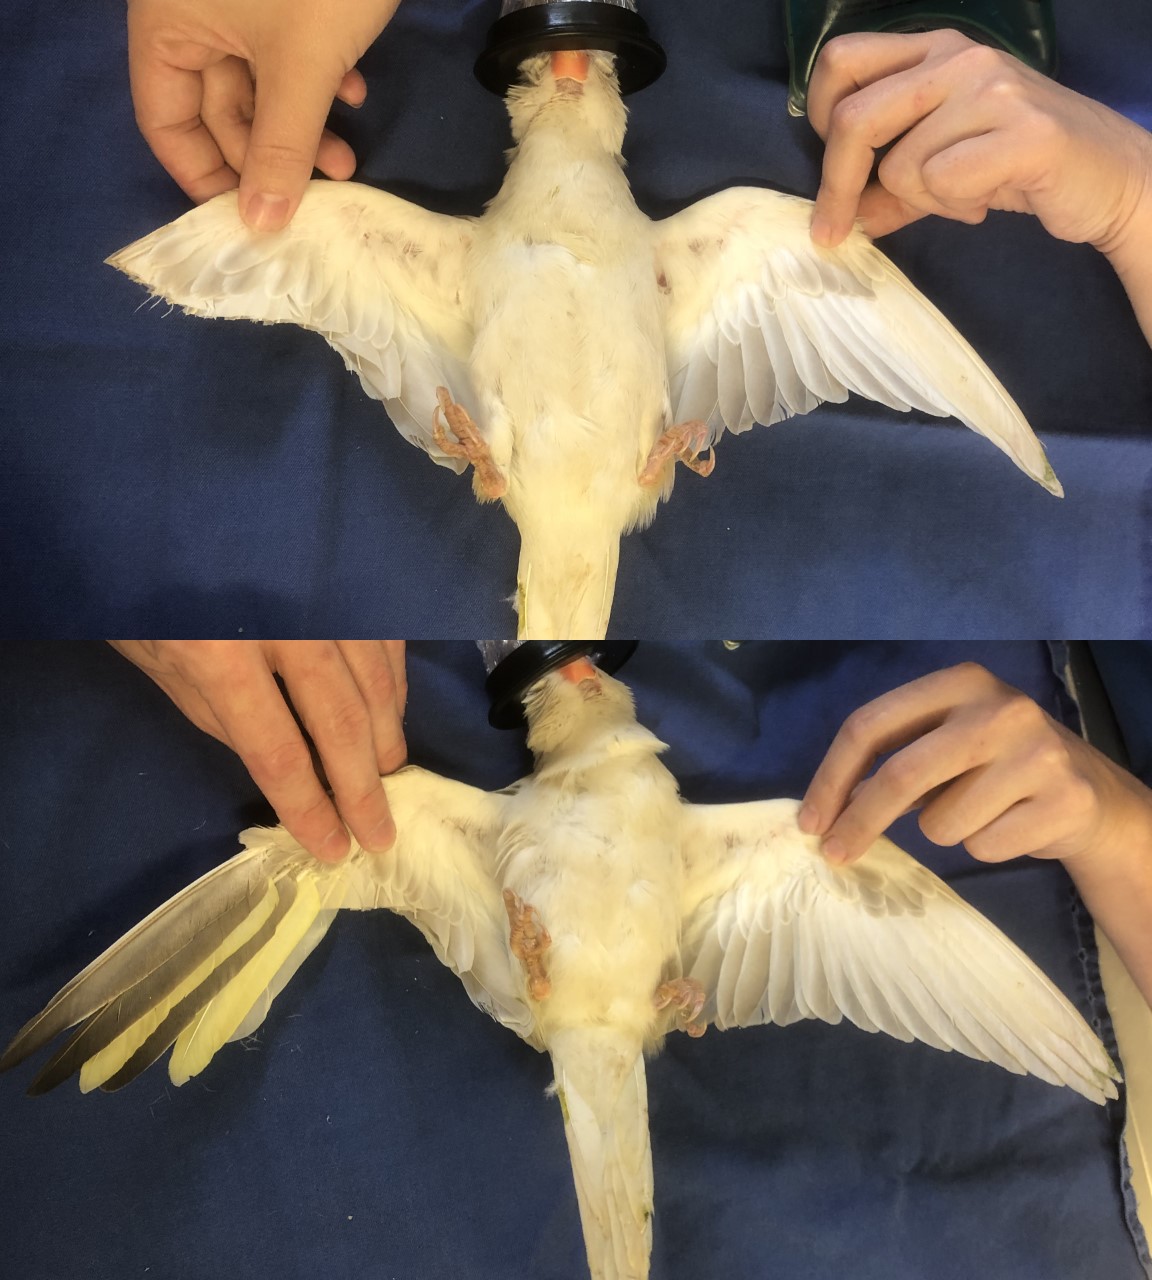 White cockatiel before and after imping procedure.